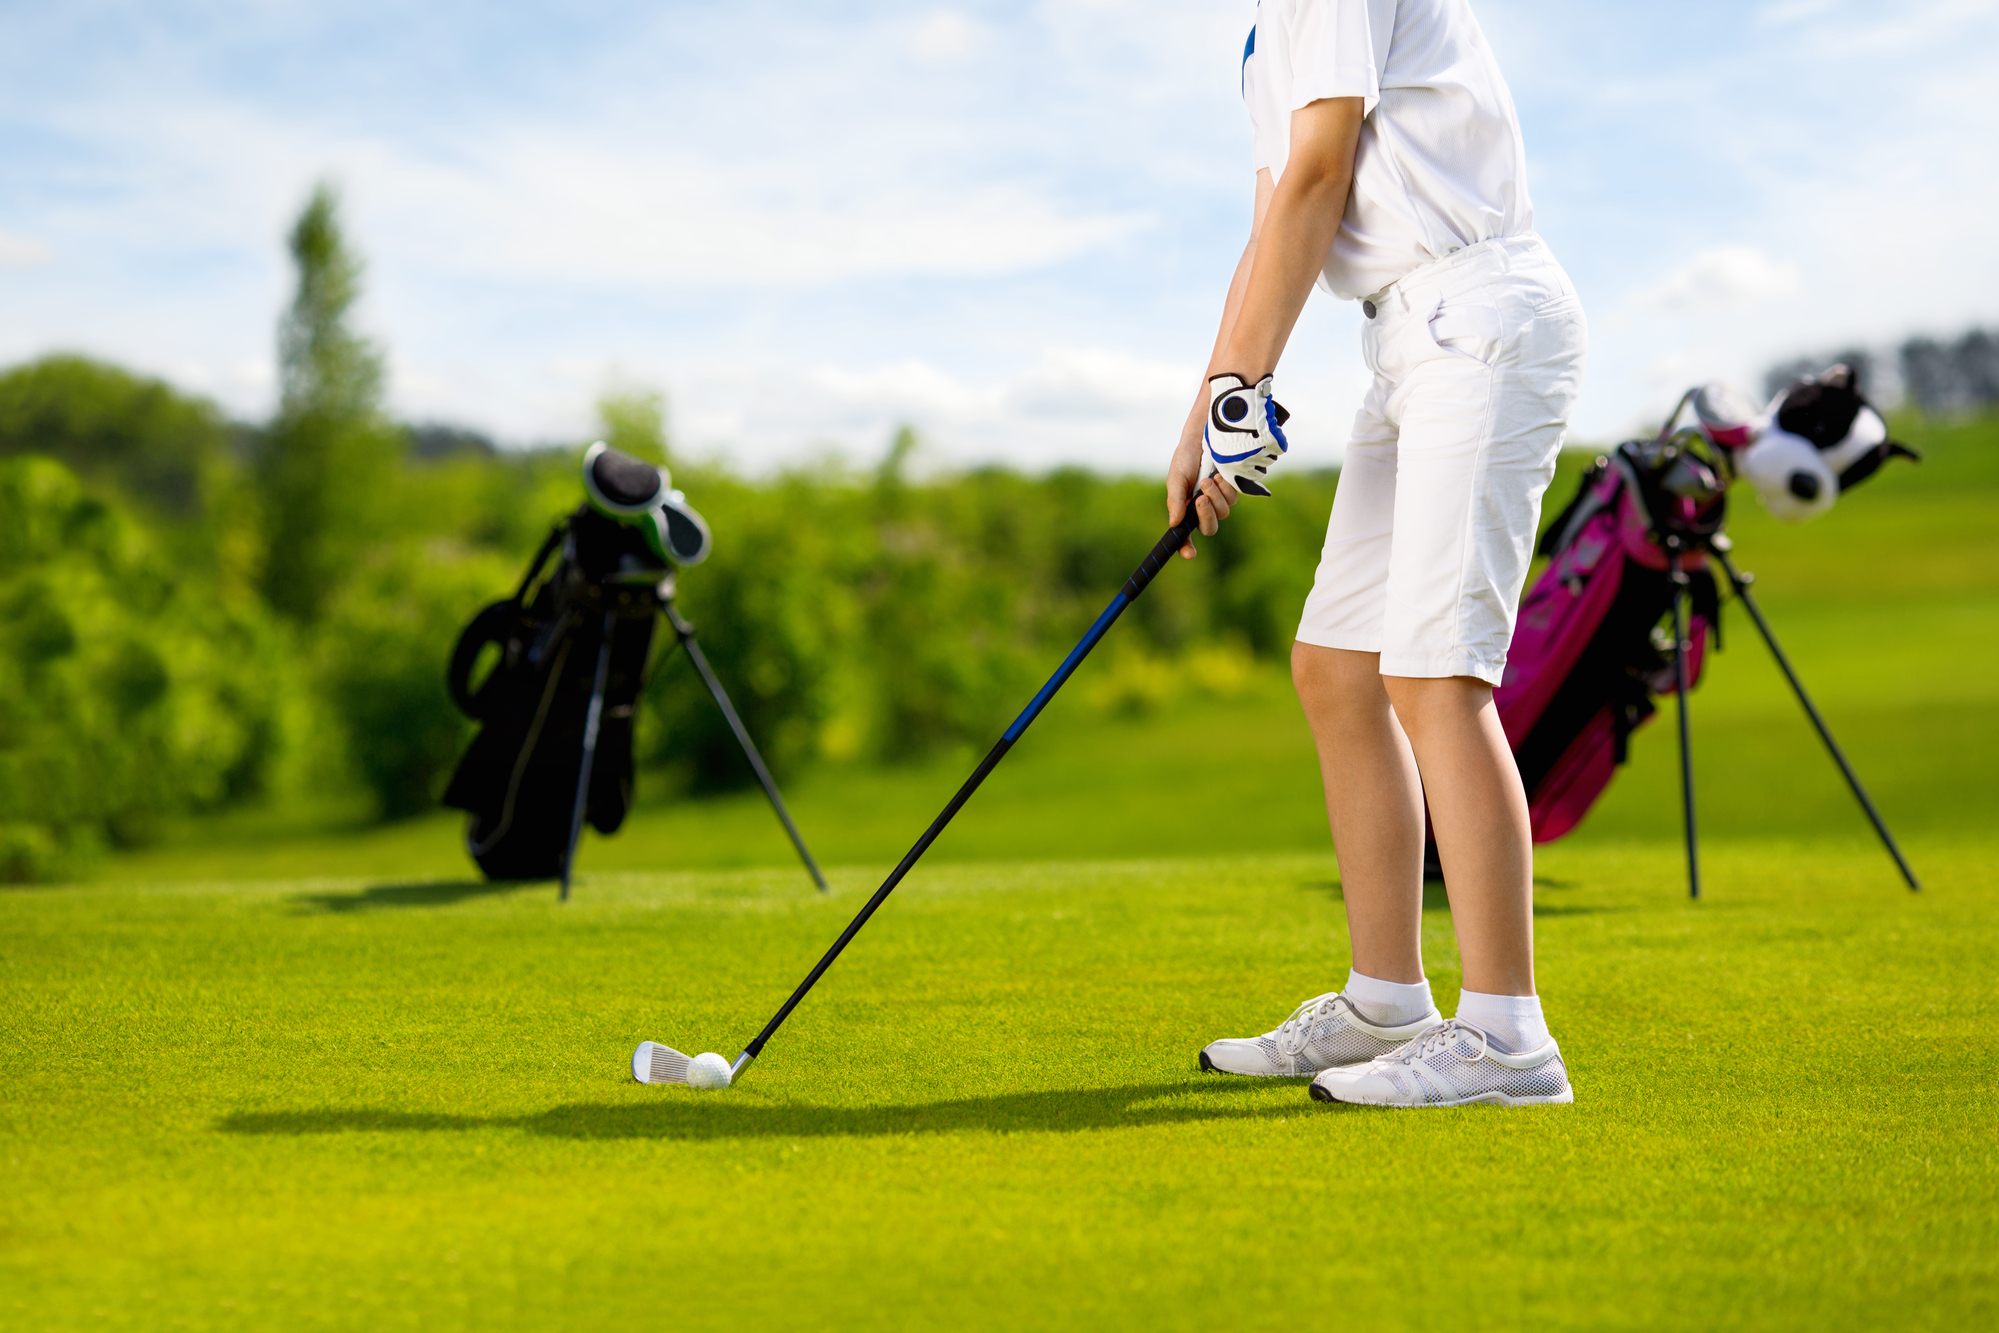 4 Big Prep Tips for Your First Golf Tournament